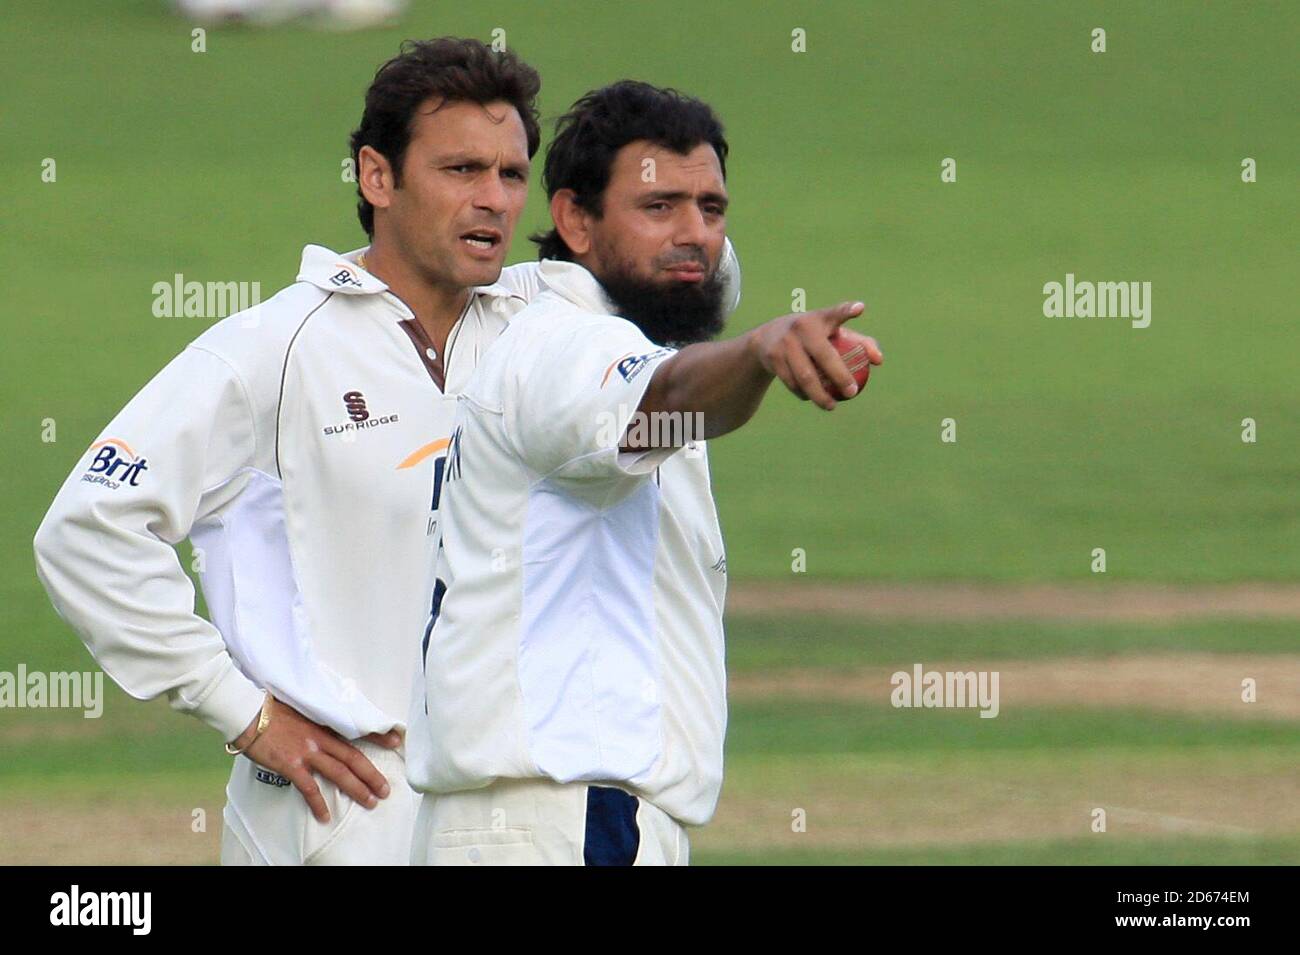 Surrey's captain Mark Ramprakash (l) and spin bowler Saqlain Mushtaq try to organise the field together Stock Photo